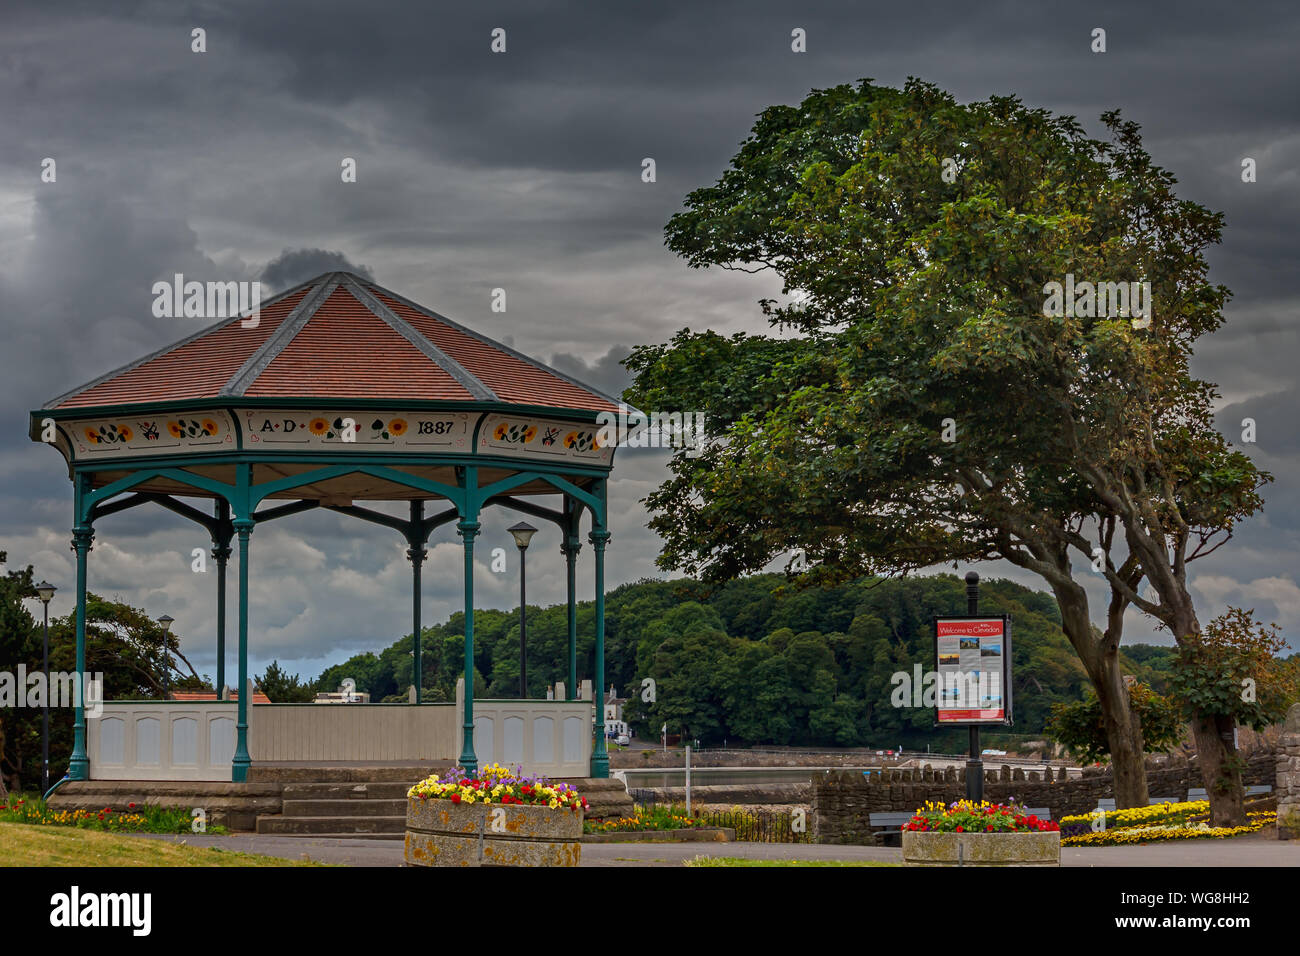 Clevedon bandstand against a dark cloudy sky Stock Photo